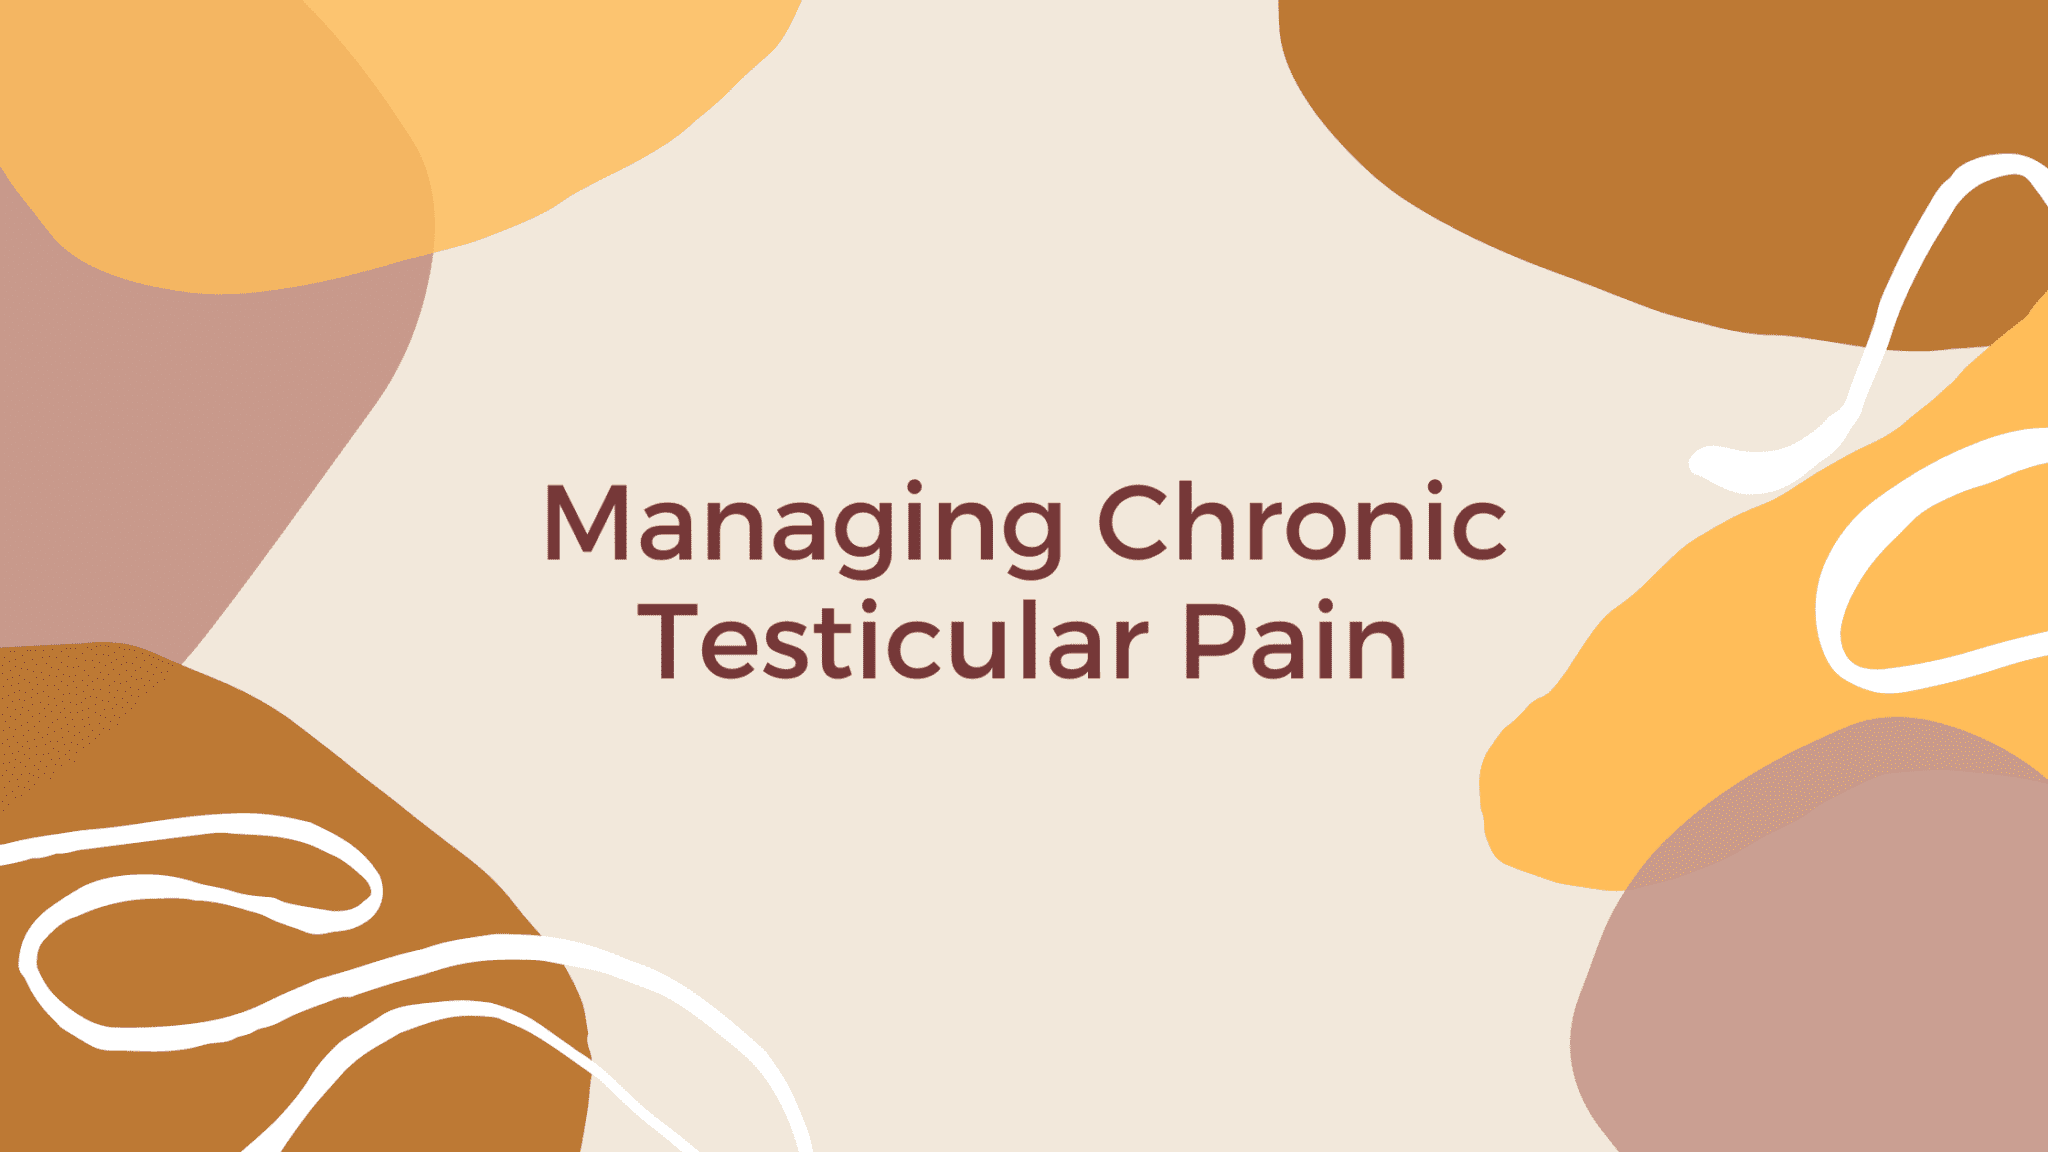 Managing Chronic Testicular Pain The Facts About Testicular Pain